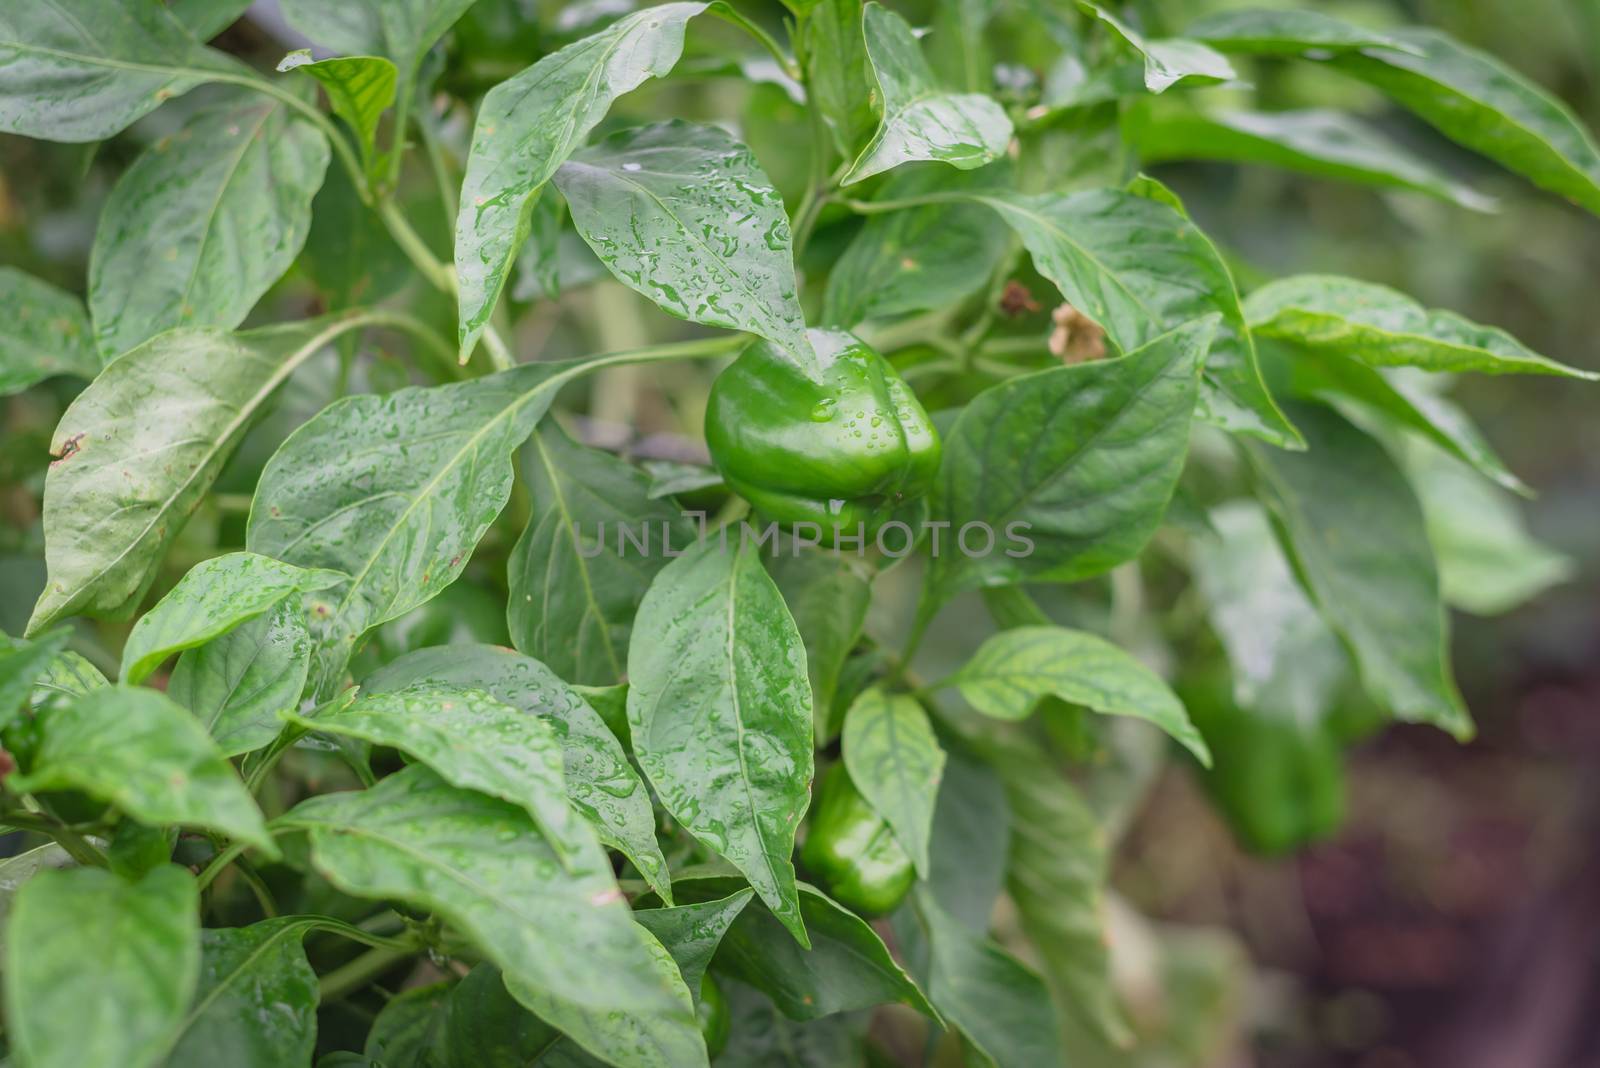 Green bell peppers on vines with water drops and flower at backyard garden near Dallas, Texas, America. Organic homegrown Capsicum fruits in nature settings